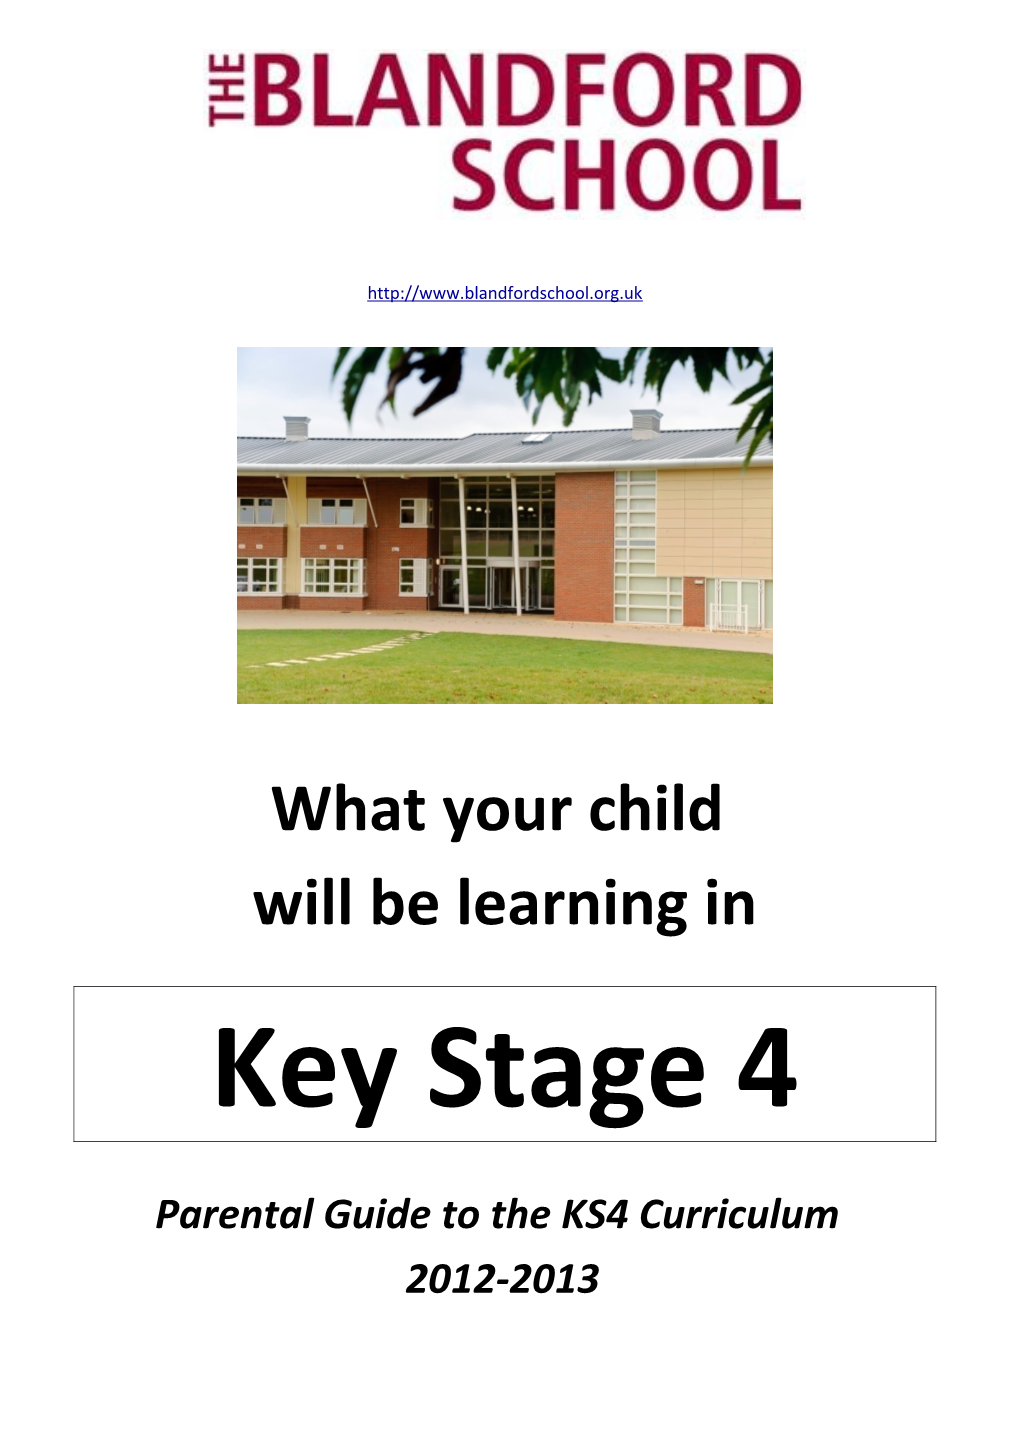 Parental Guide to the KS4 Curriculum